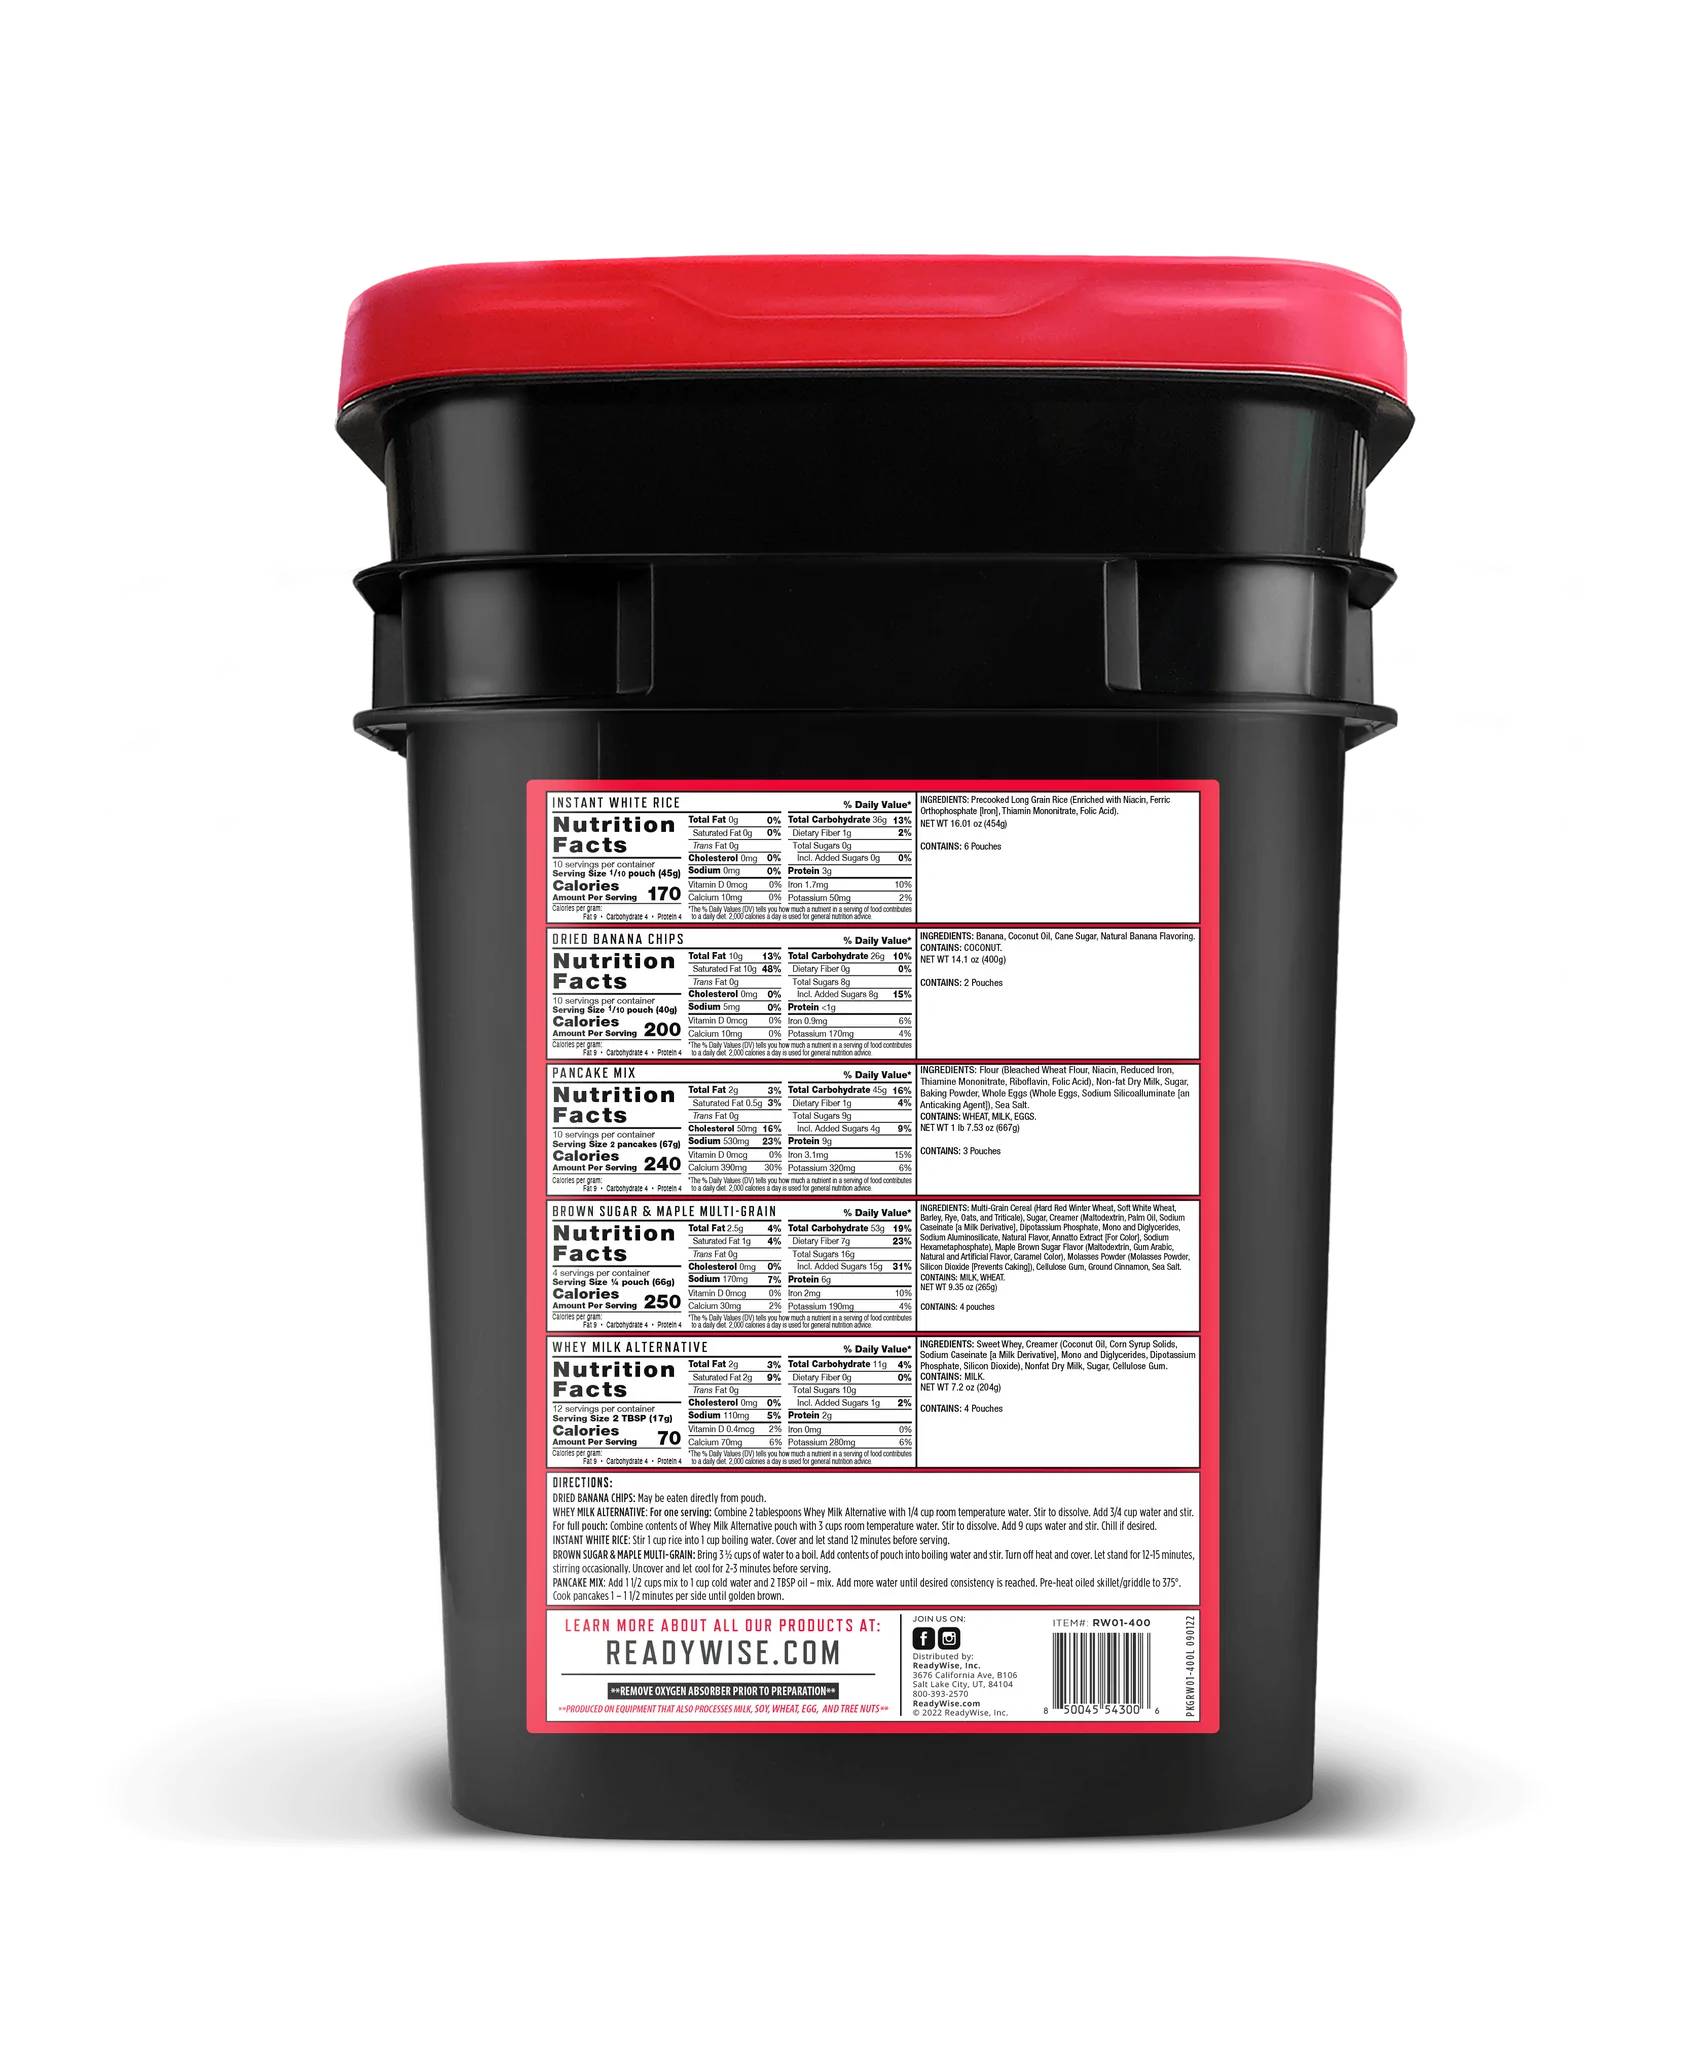 A black bucket with a red lid, containing a ReadyWise 4-Week Supply of 298 servings.